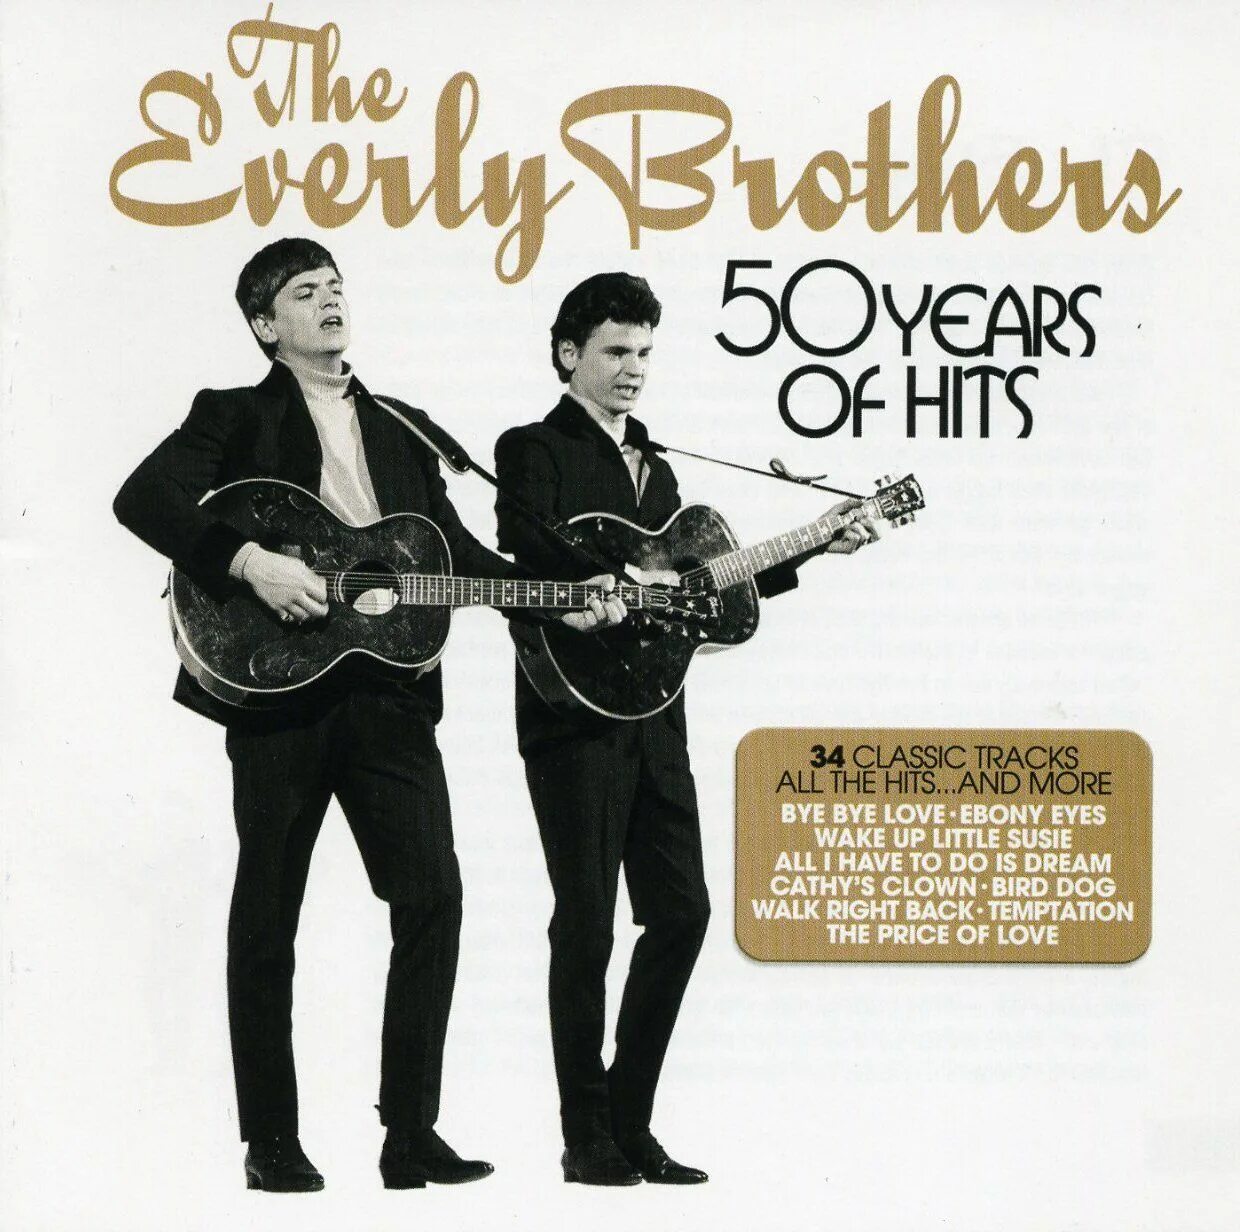 Everly brothers. The Everly brothers американский дуэт. Everly brothers – 50 years of Hits. The Everly brothers - обложка.